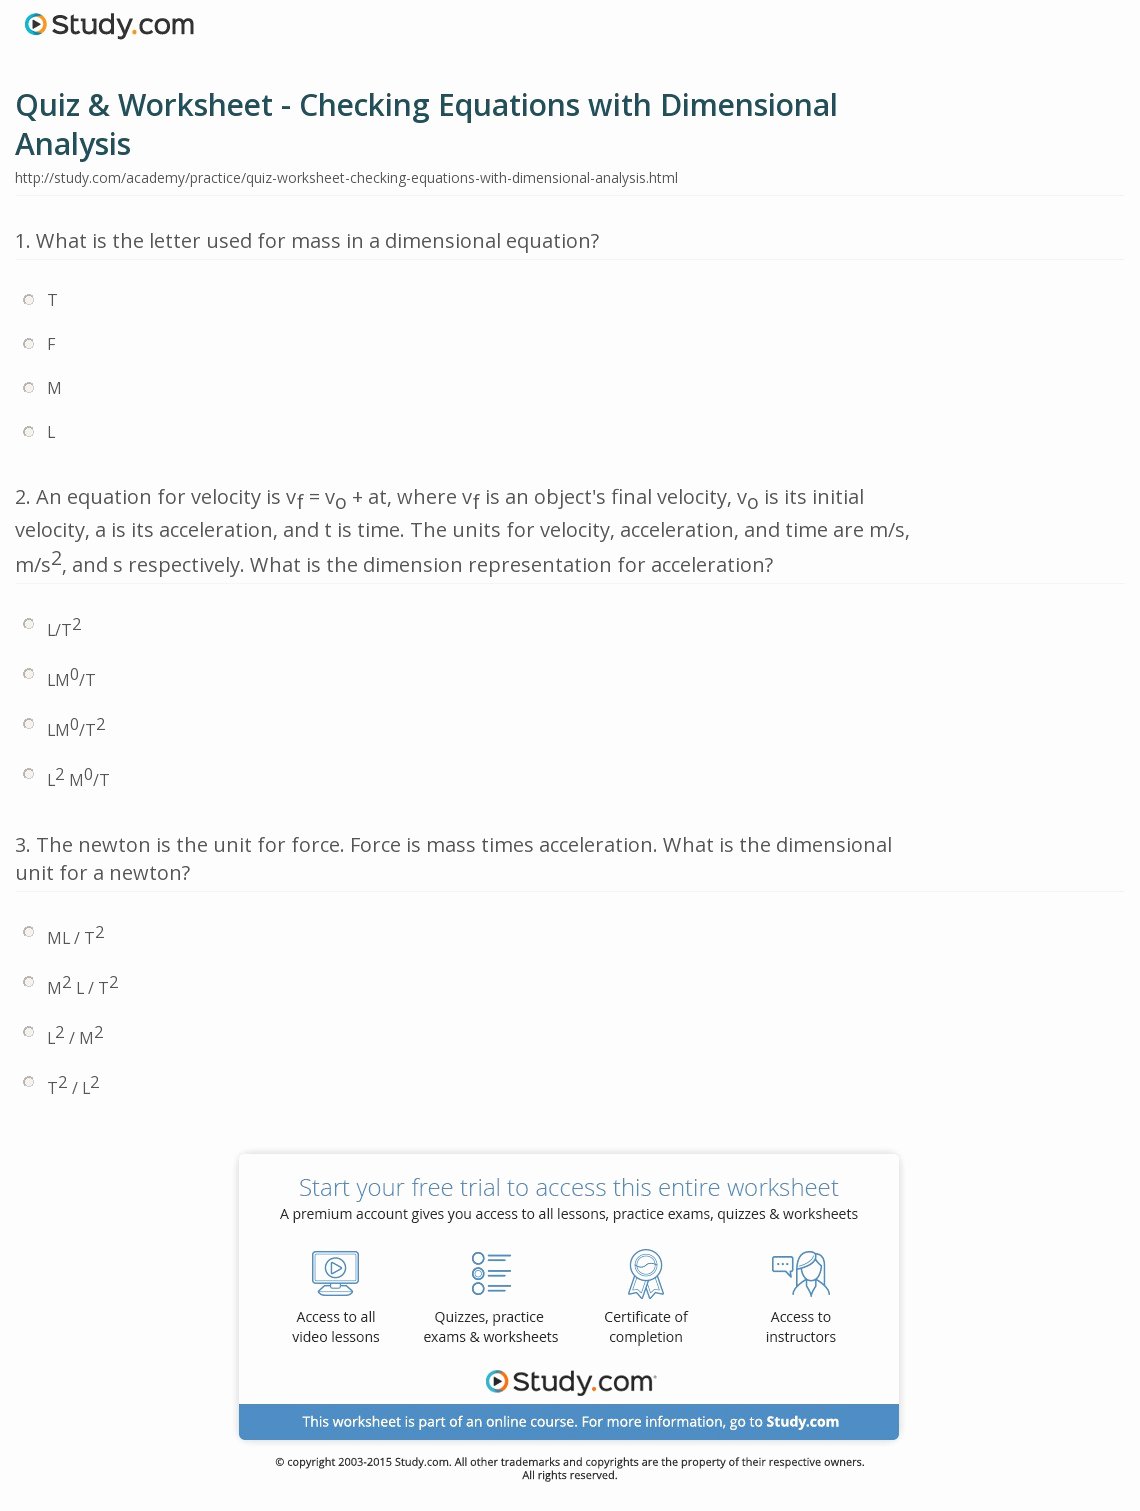 Dimensional Analysis Practice Worksheet Inspirational Quiz &amp; Worksheet Checking Equations with Dimensional